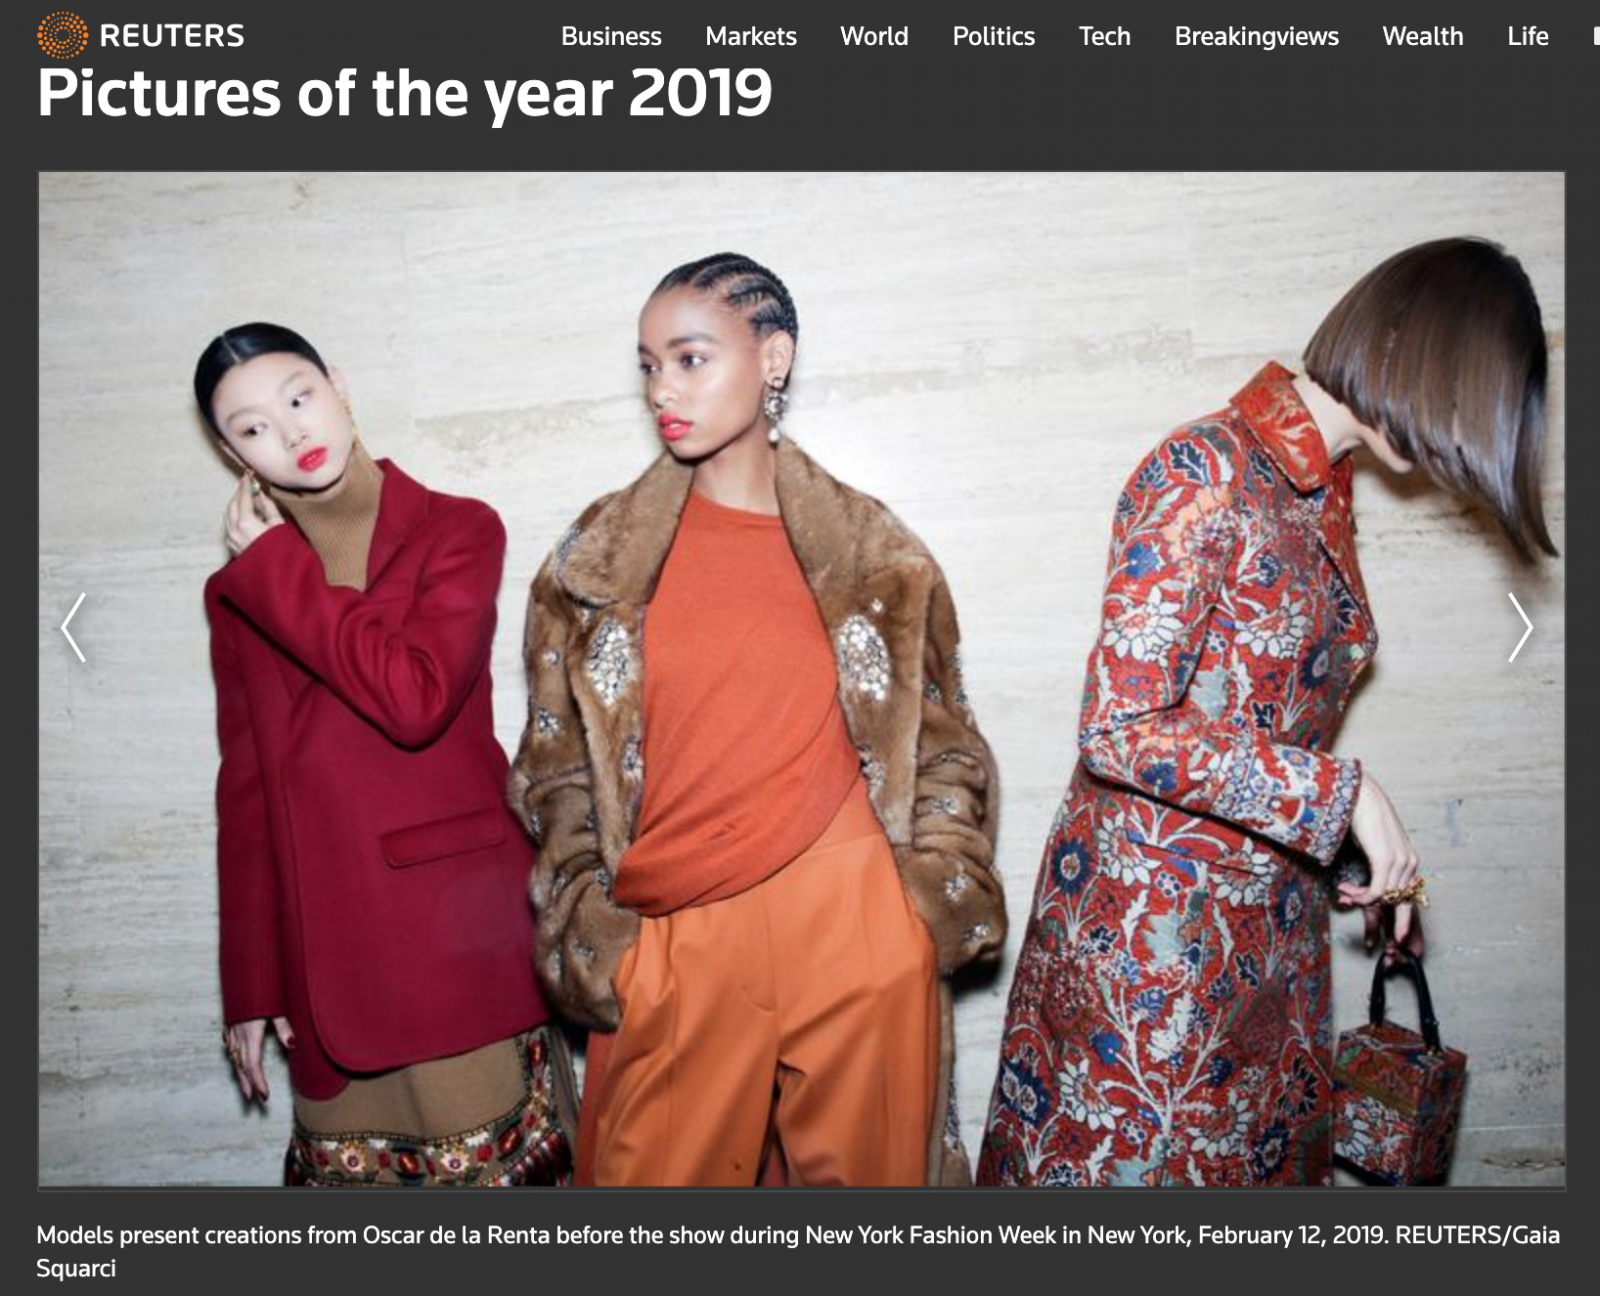 NYC Fashion Week in Reuters Pictures of the Year